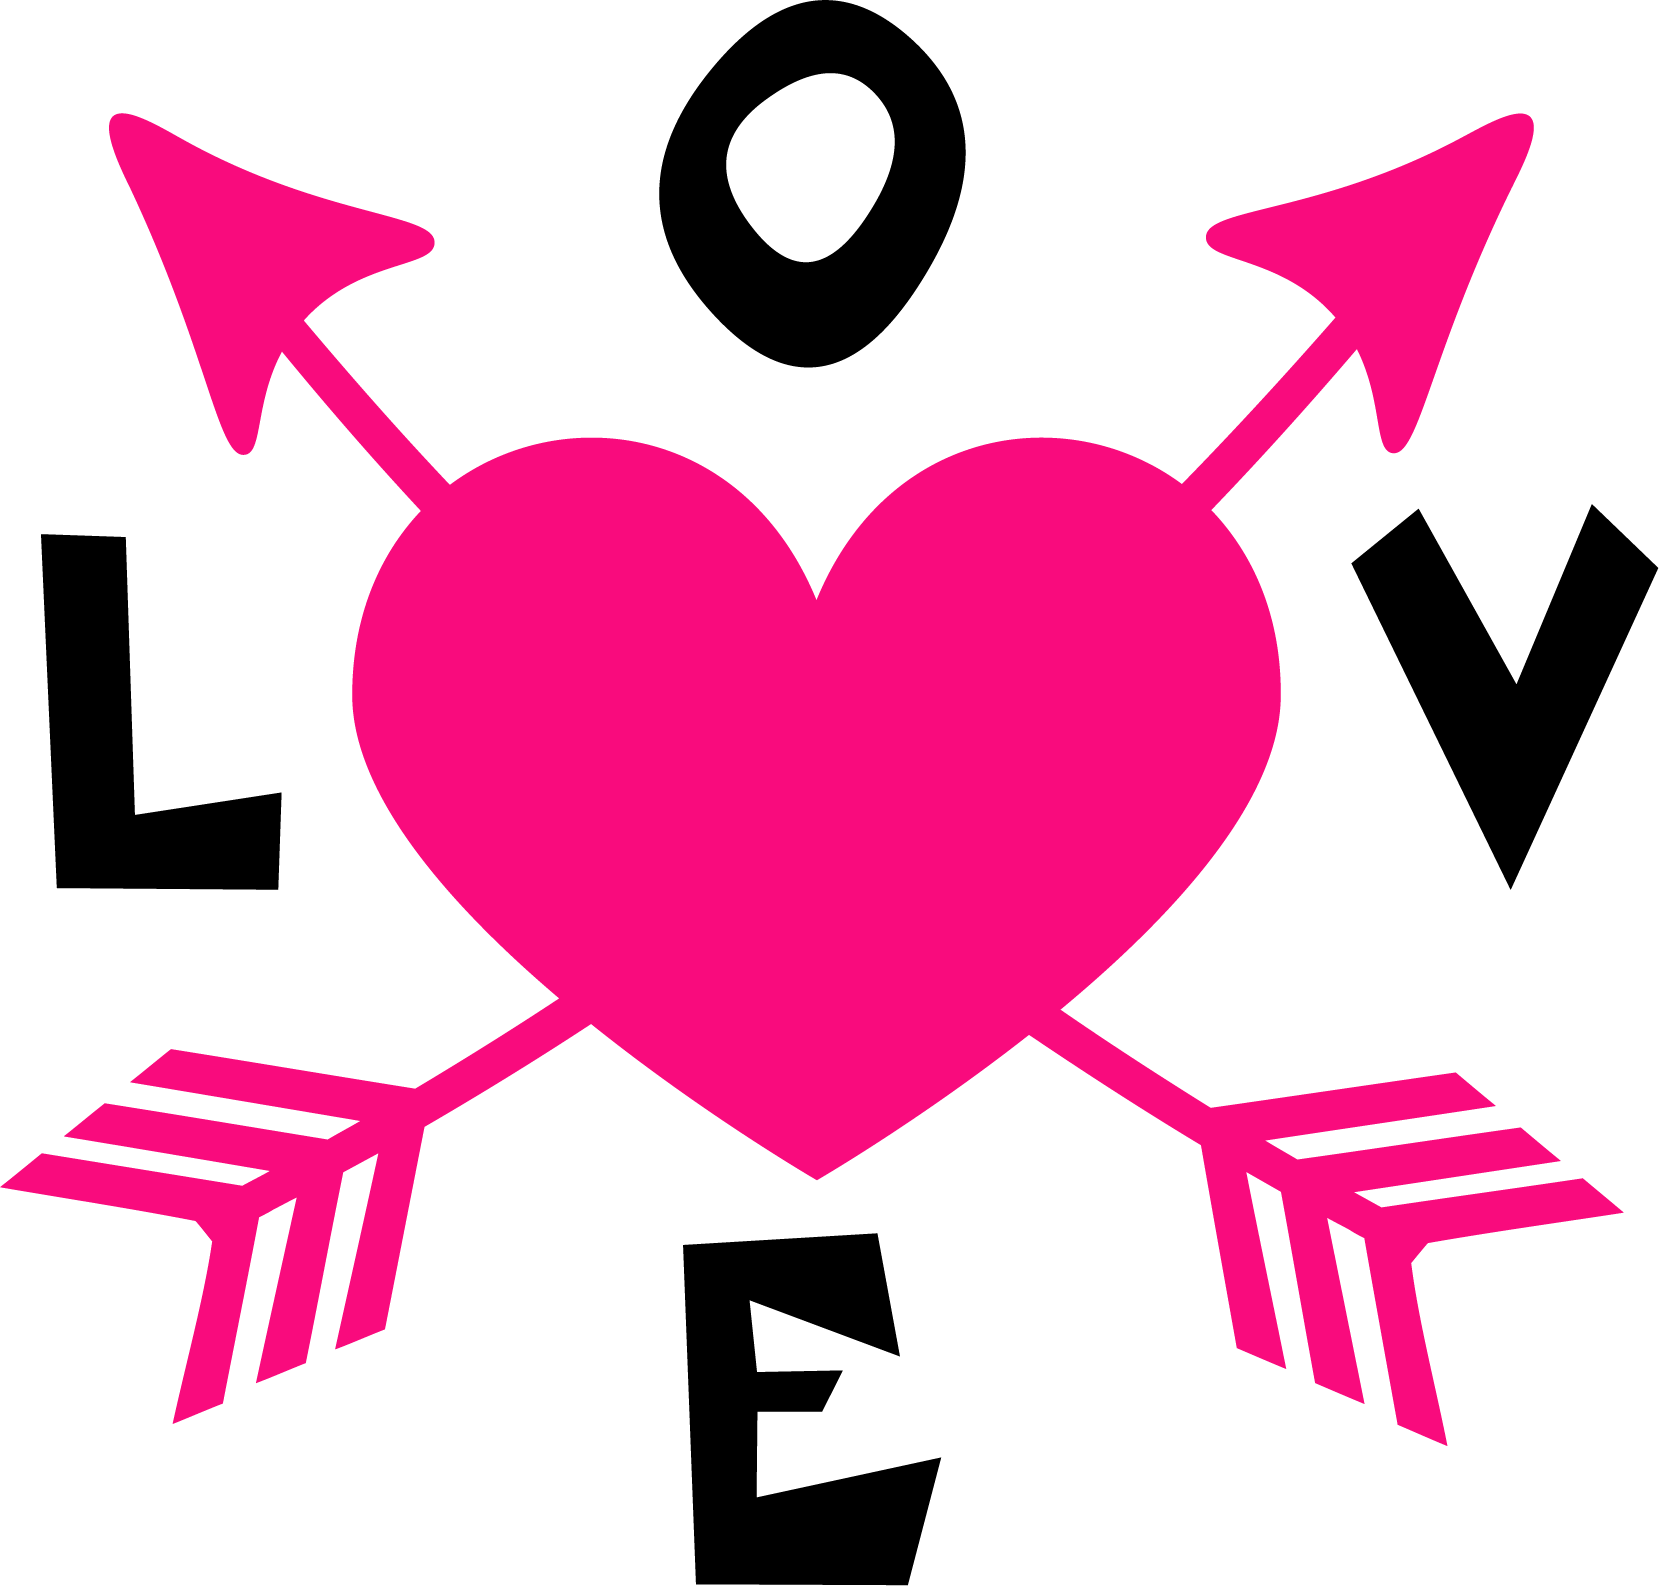 A Pink Heart With Arrows